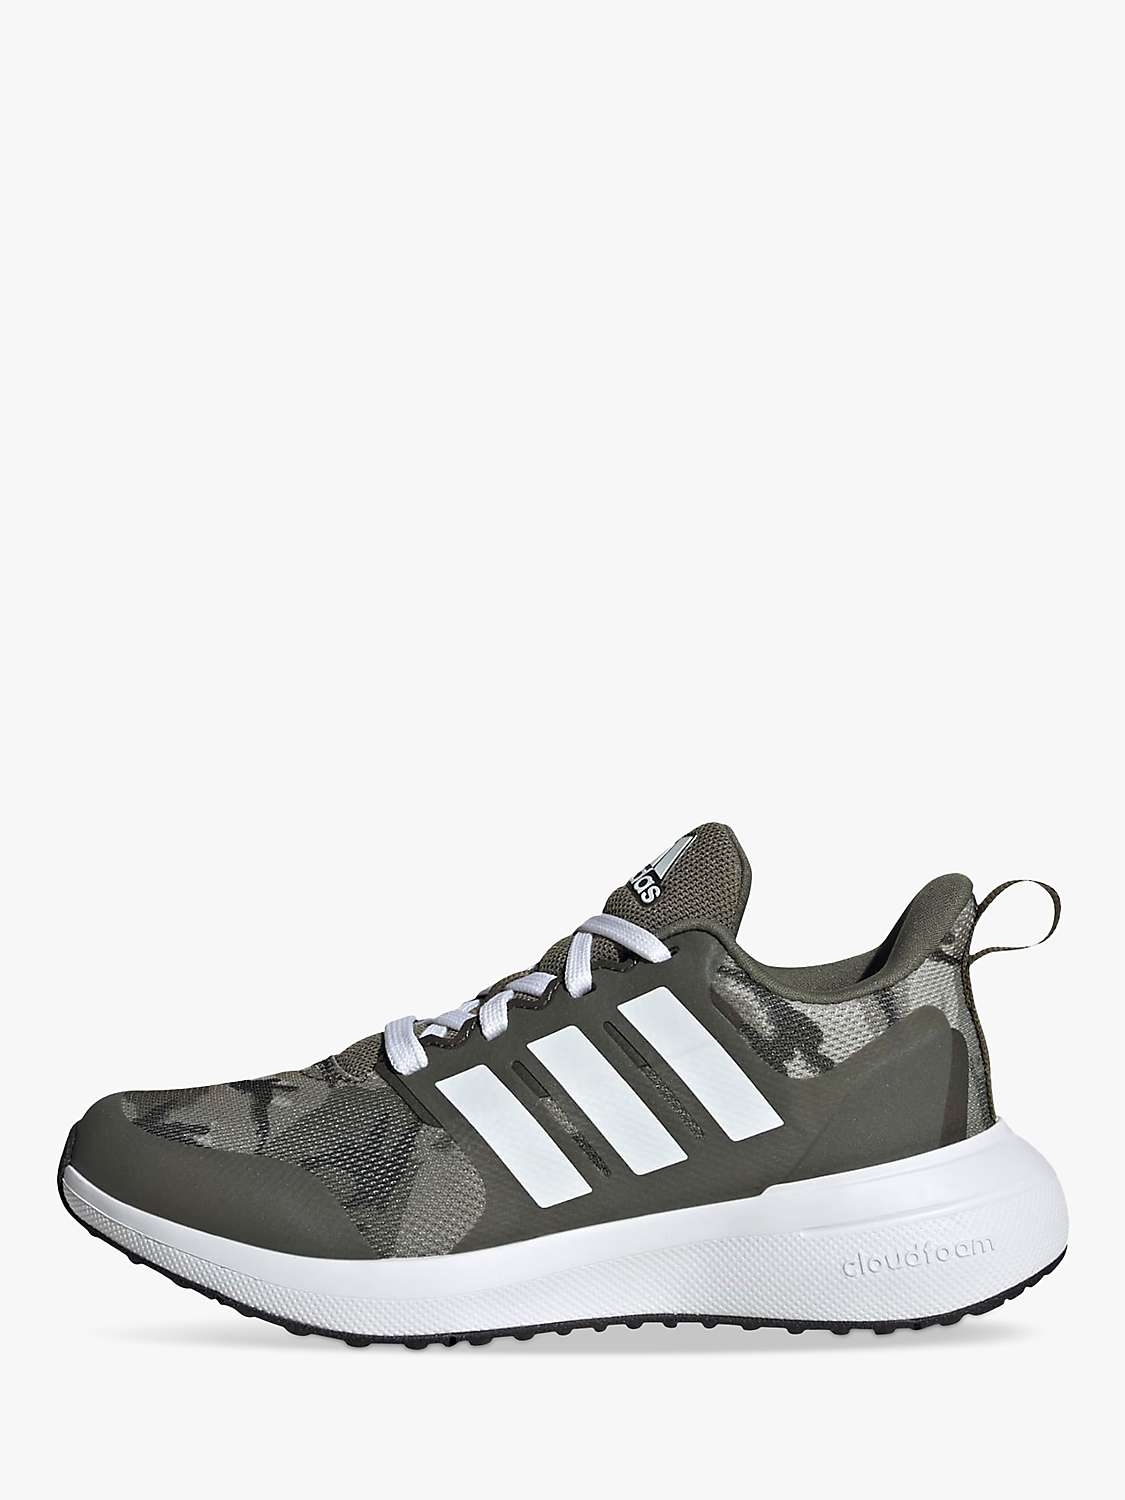 Buy adidas Kids' Fortarun 2.0 Lace Up Camouflage Trainers, Olive/White Online at johnlewis.com